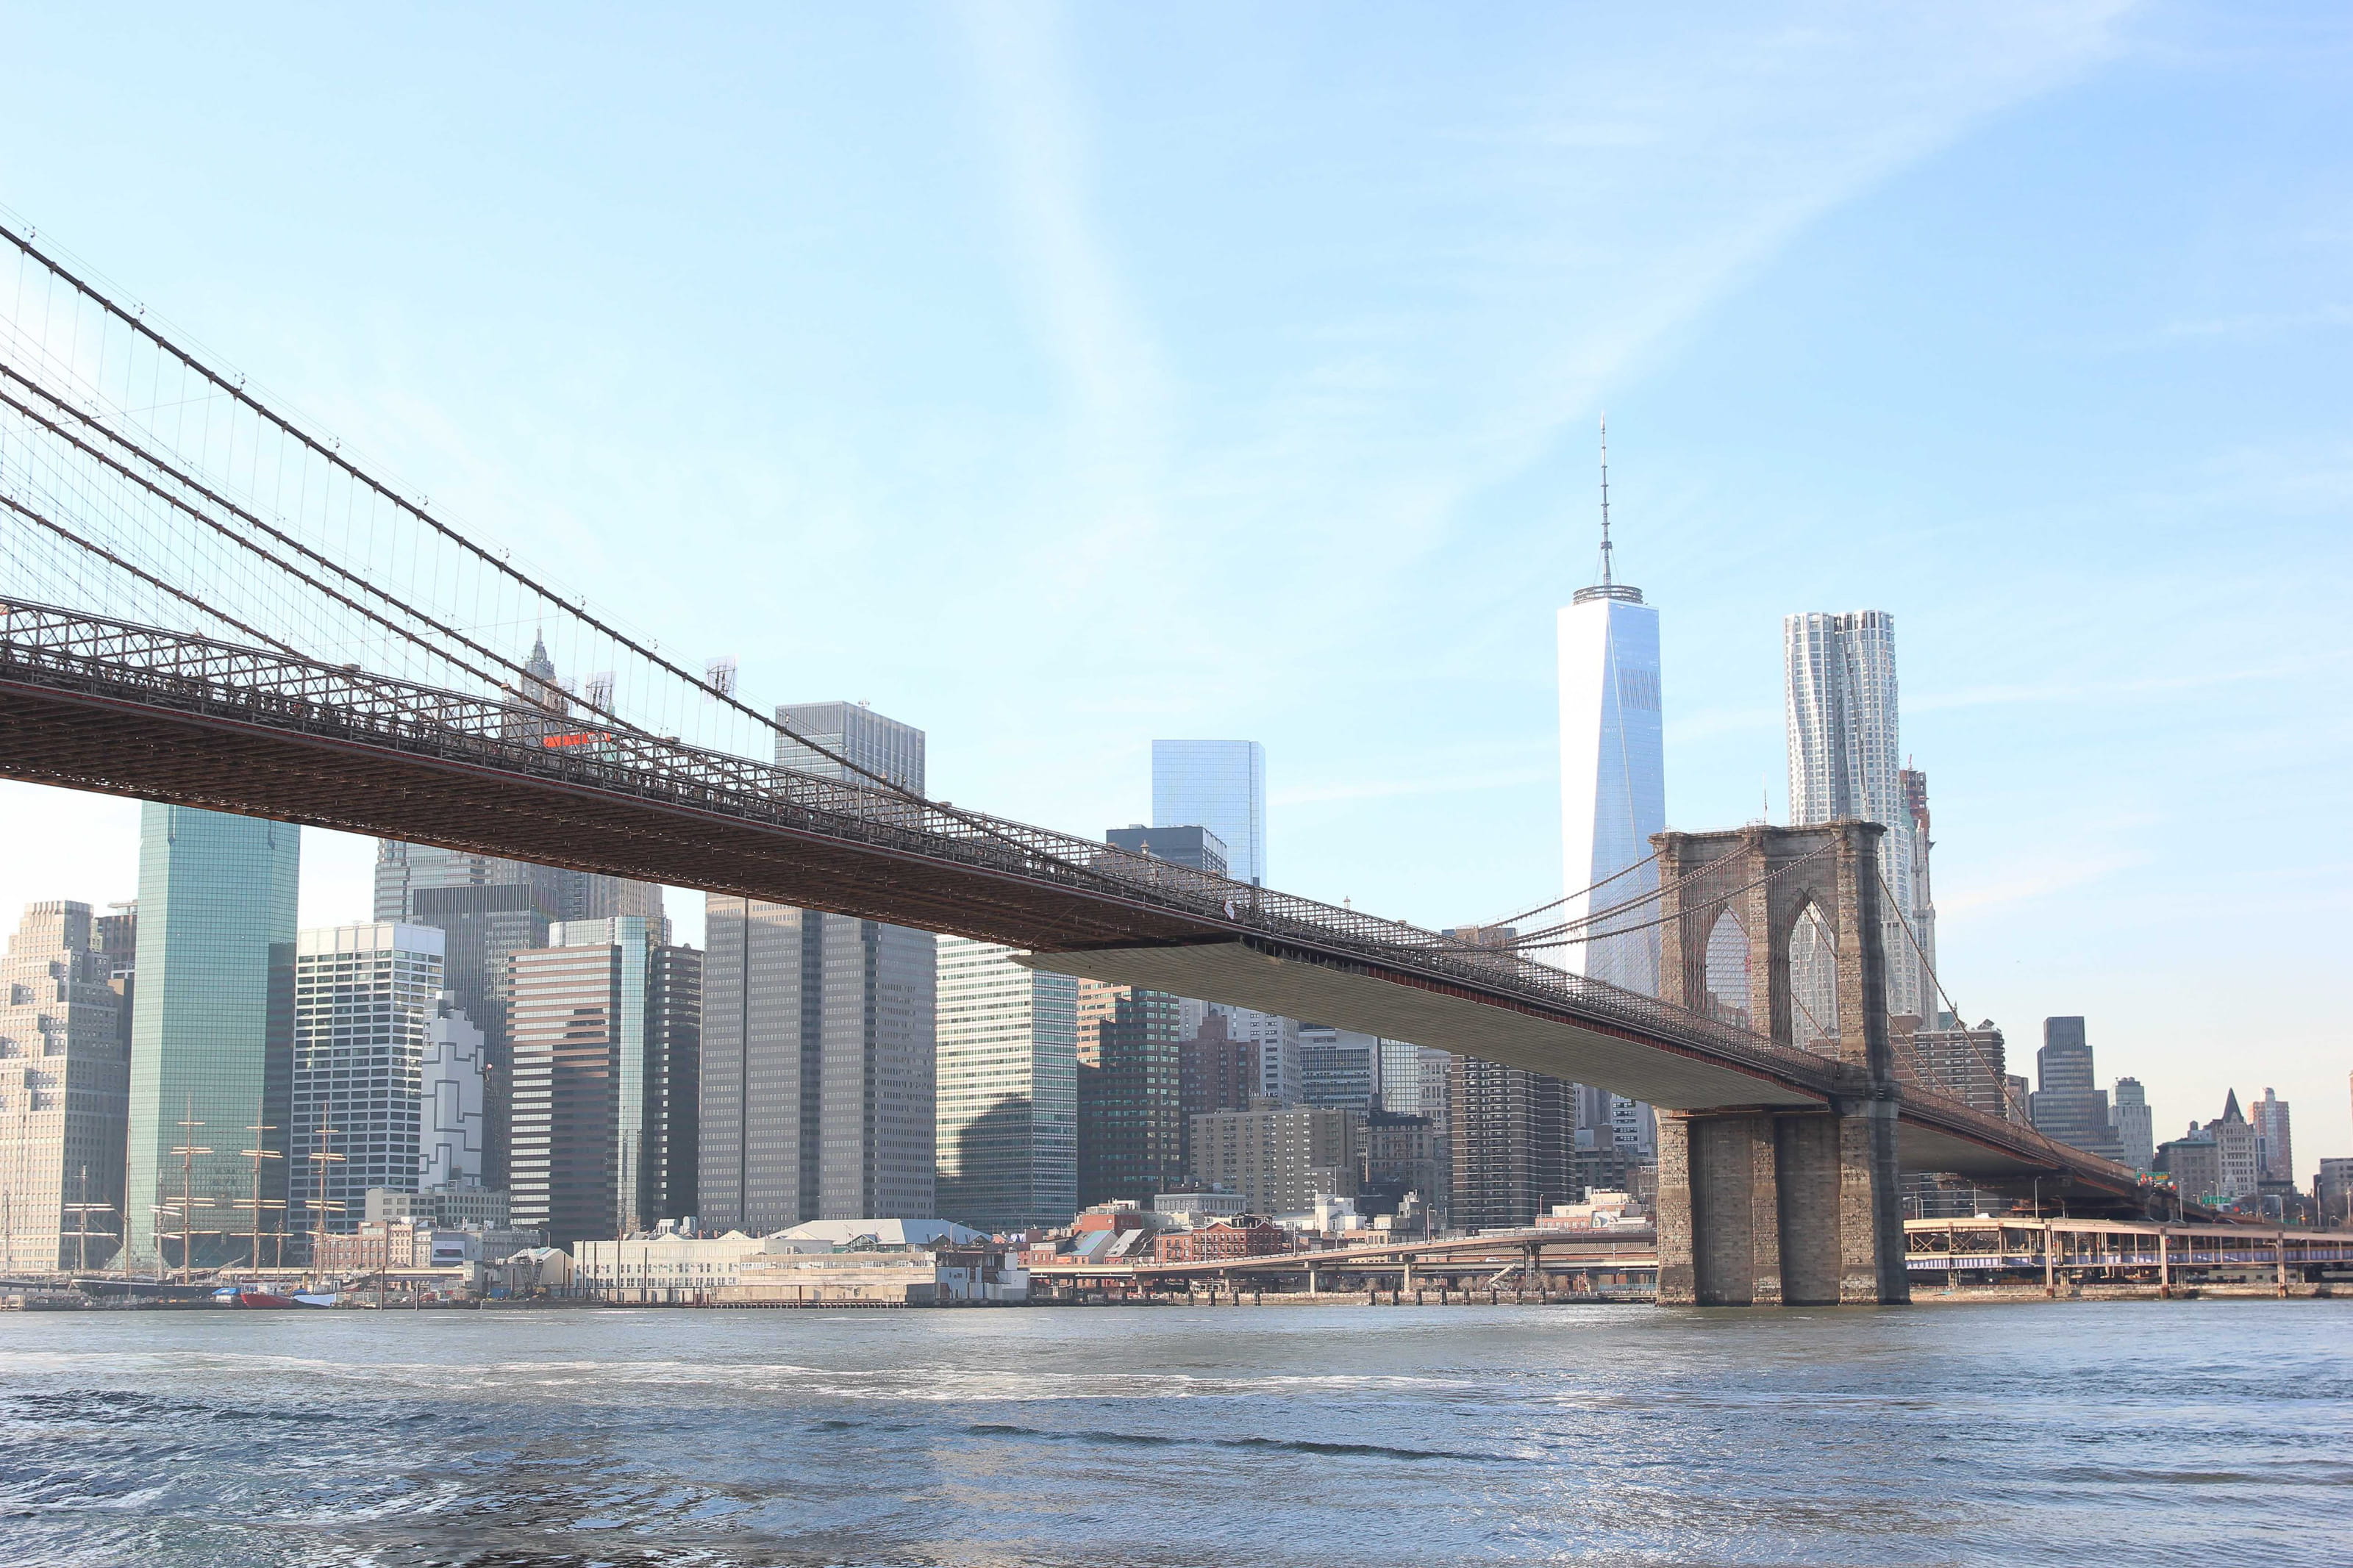 The Brooklyn Bridge connects the boroughs of Manhattan and Brooklyn, spanning the East River.